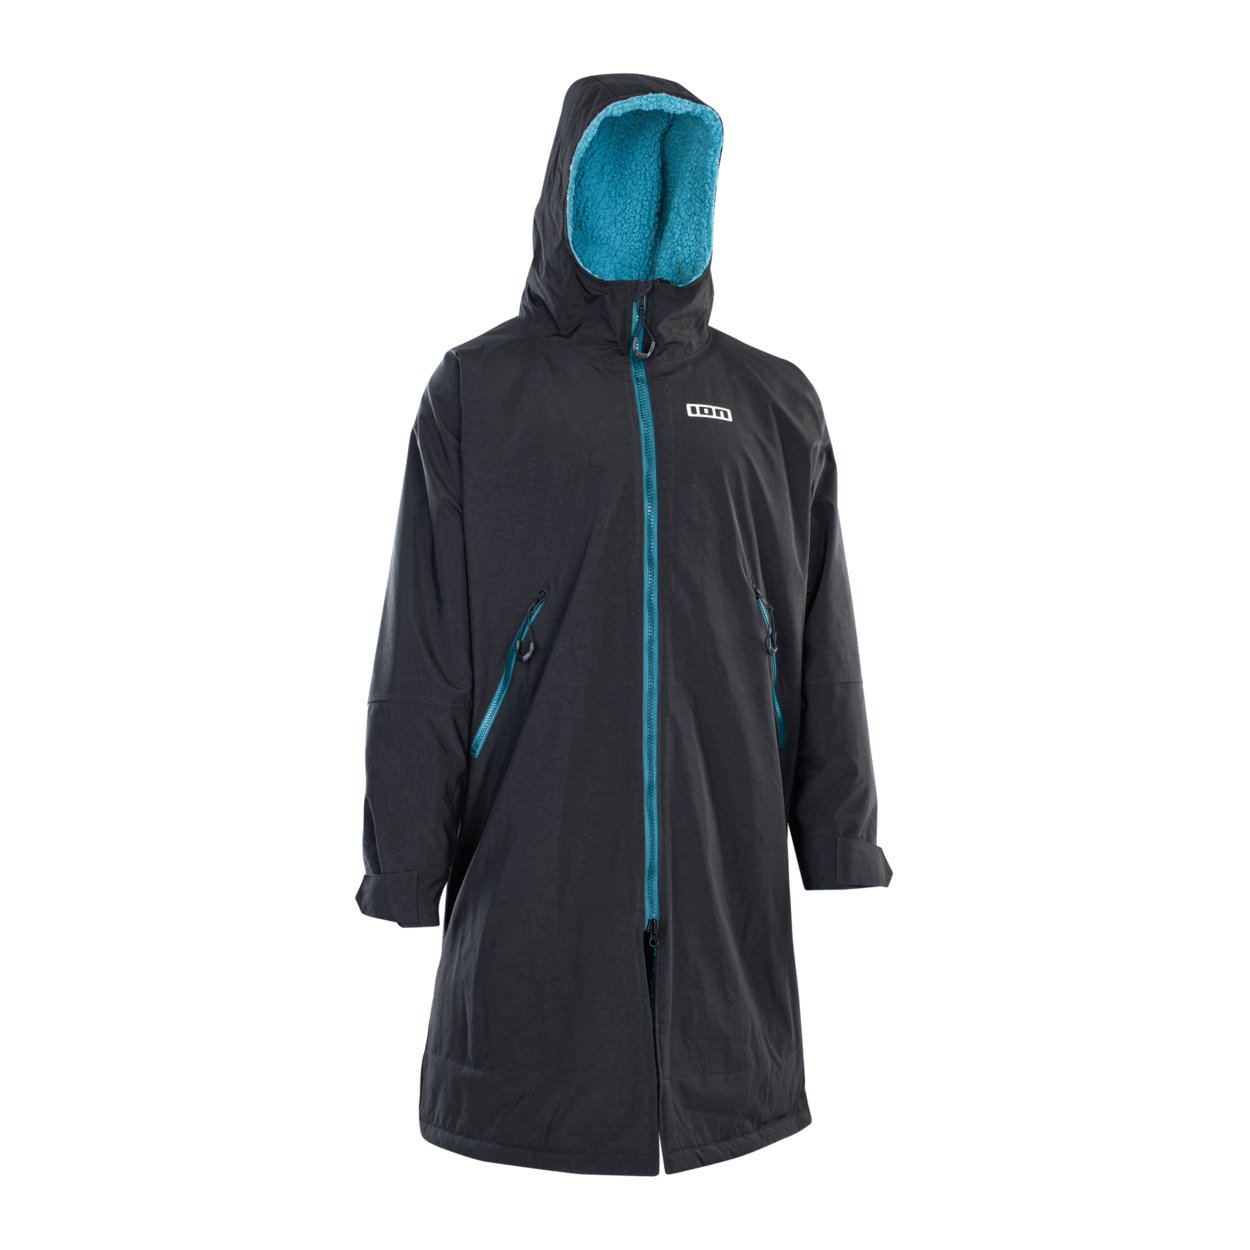 ION Storm Coat 2022 - Worthing Watersports - 9010583062358 - Accessories - ION Water